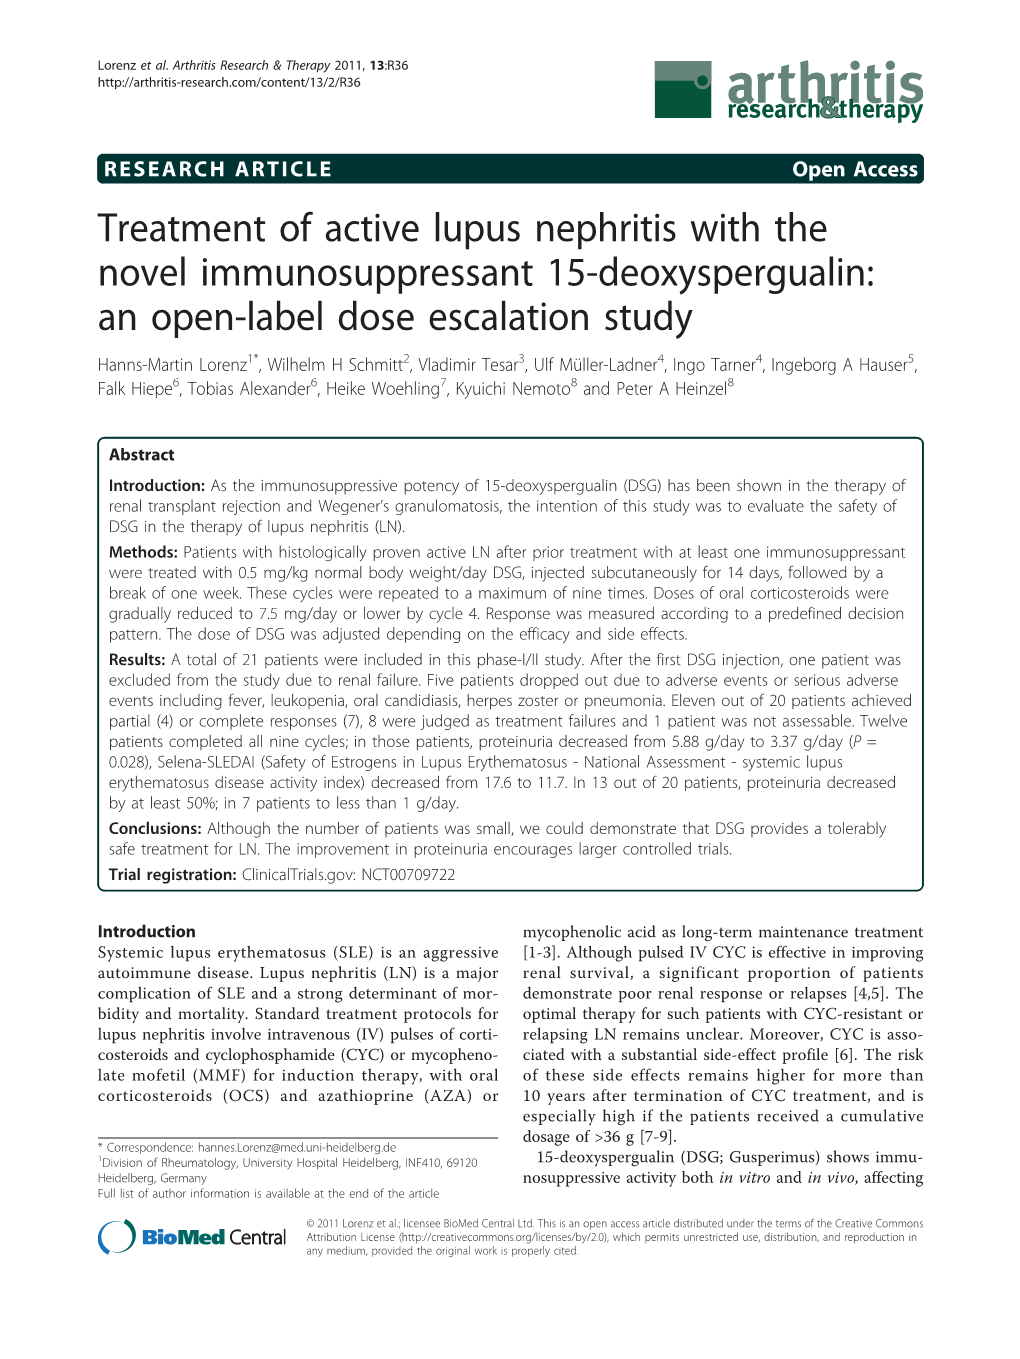 Treatment of Active Lupus Nephritis with the Novel Immunosuppressant 15-Deoxyspergualin: an Open-Label Dose Escalation Study